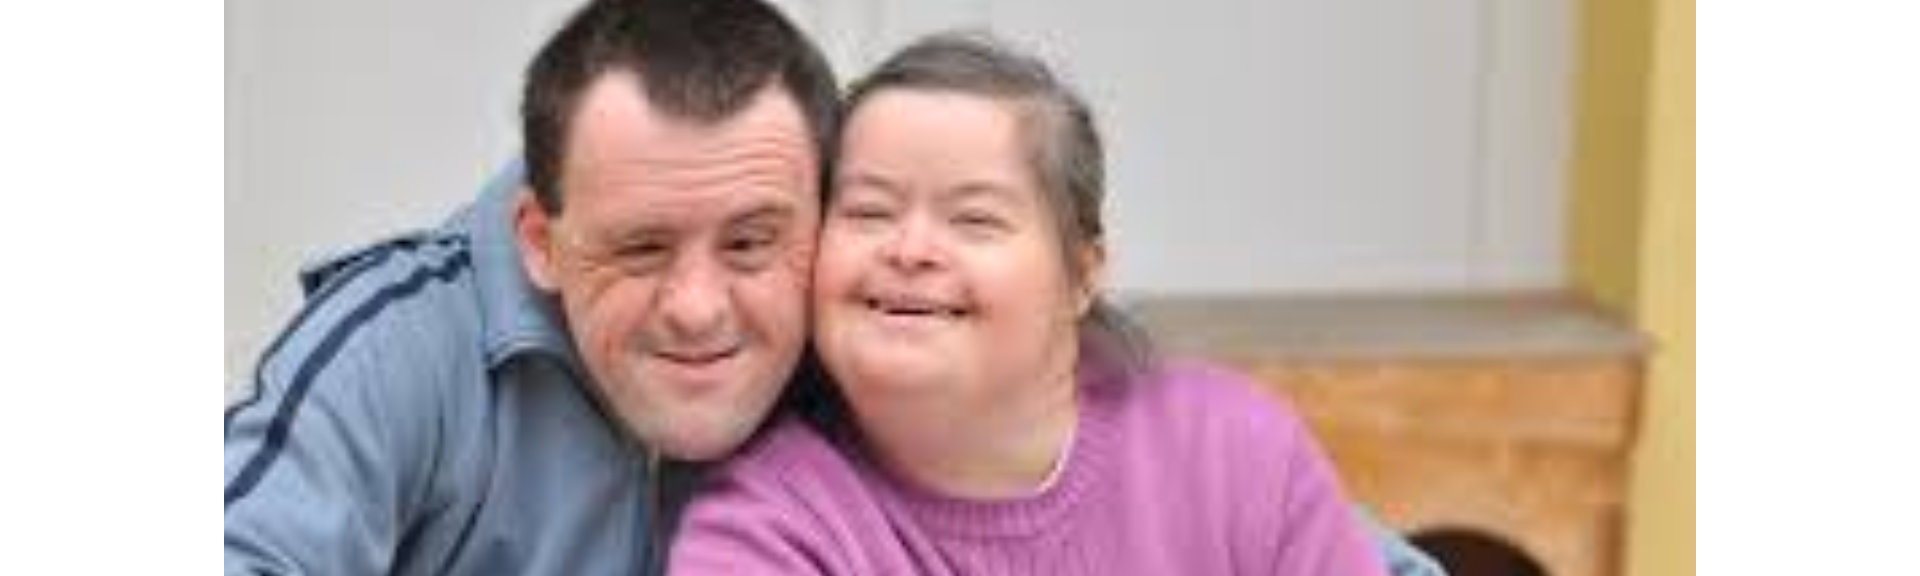 Portrait of two people with special needs